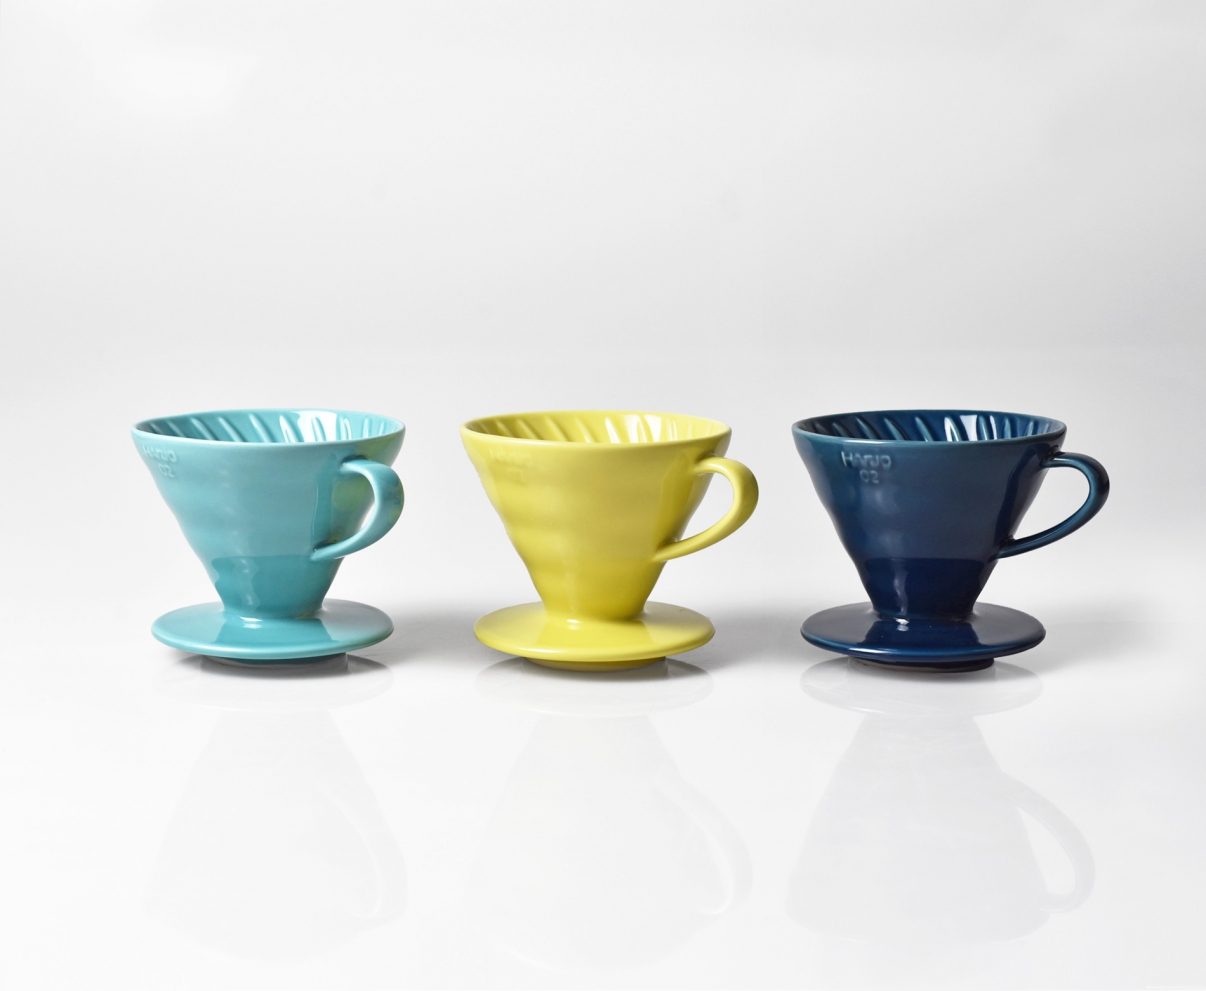 The Coffee Officina Hario V60 Ceramic Dripper Turquoise Yellow and Indigo Blue